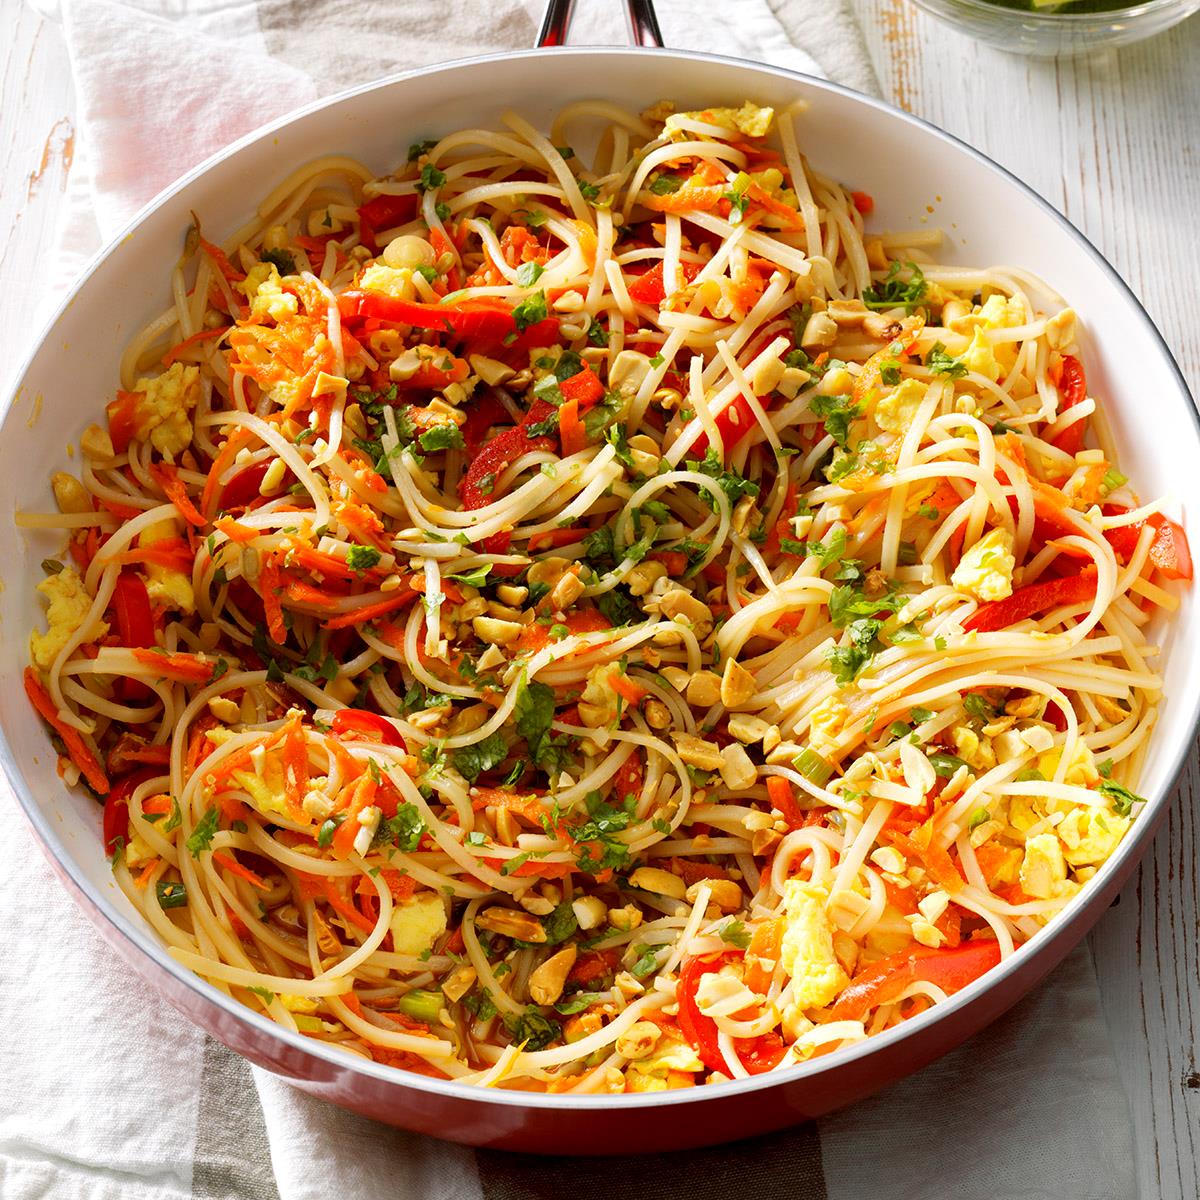 Vegetarian Pad Thai Recipe Taste Of Home,Italian For Grandmother And Grandfather